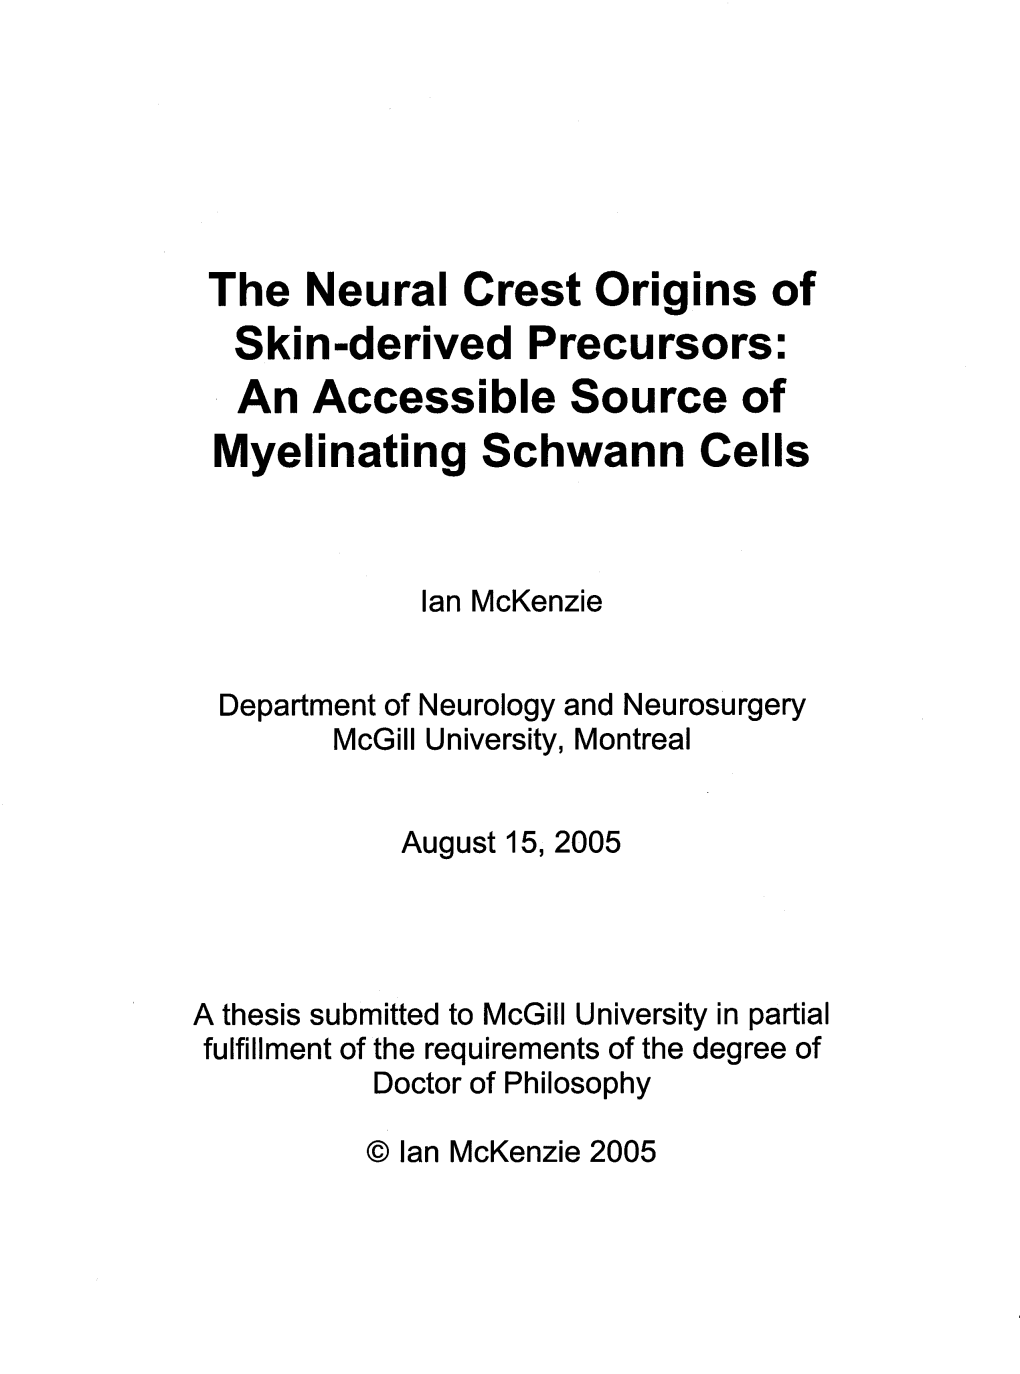 The Neural Crest Origins of Skin-Derived Precursors: an Accessible Source of Myelinating Schwann Cells